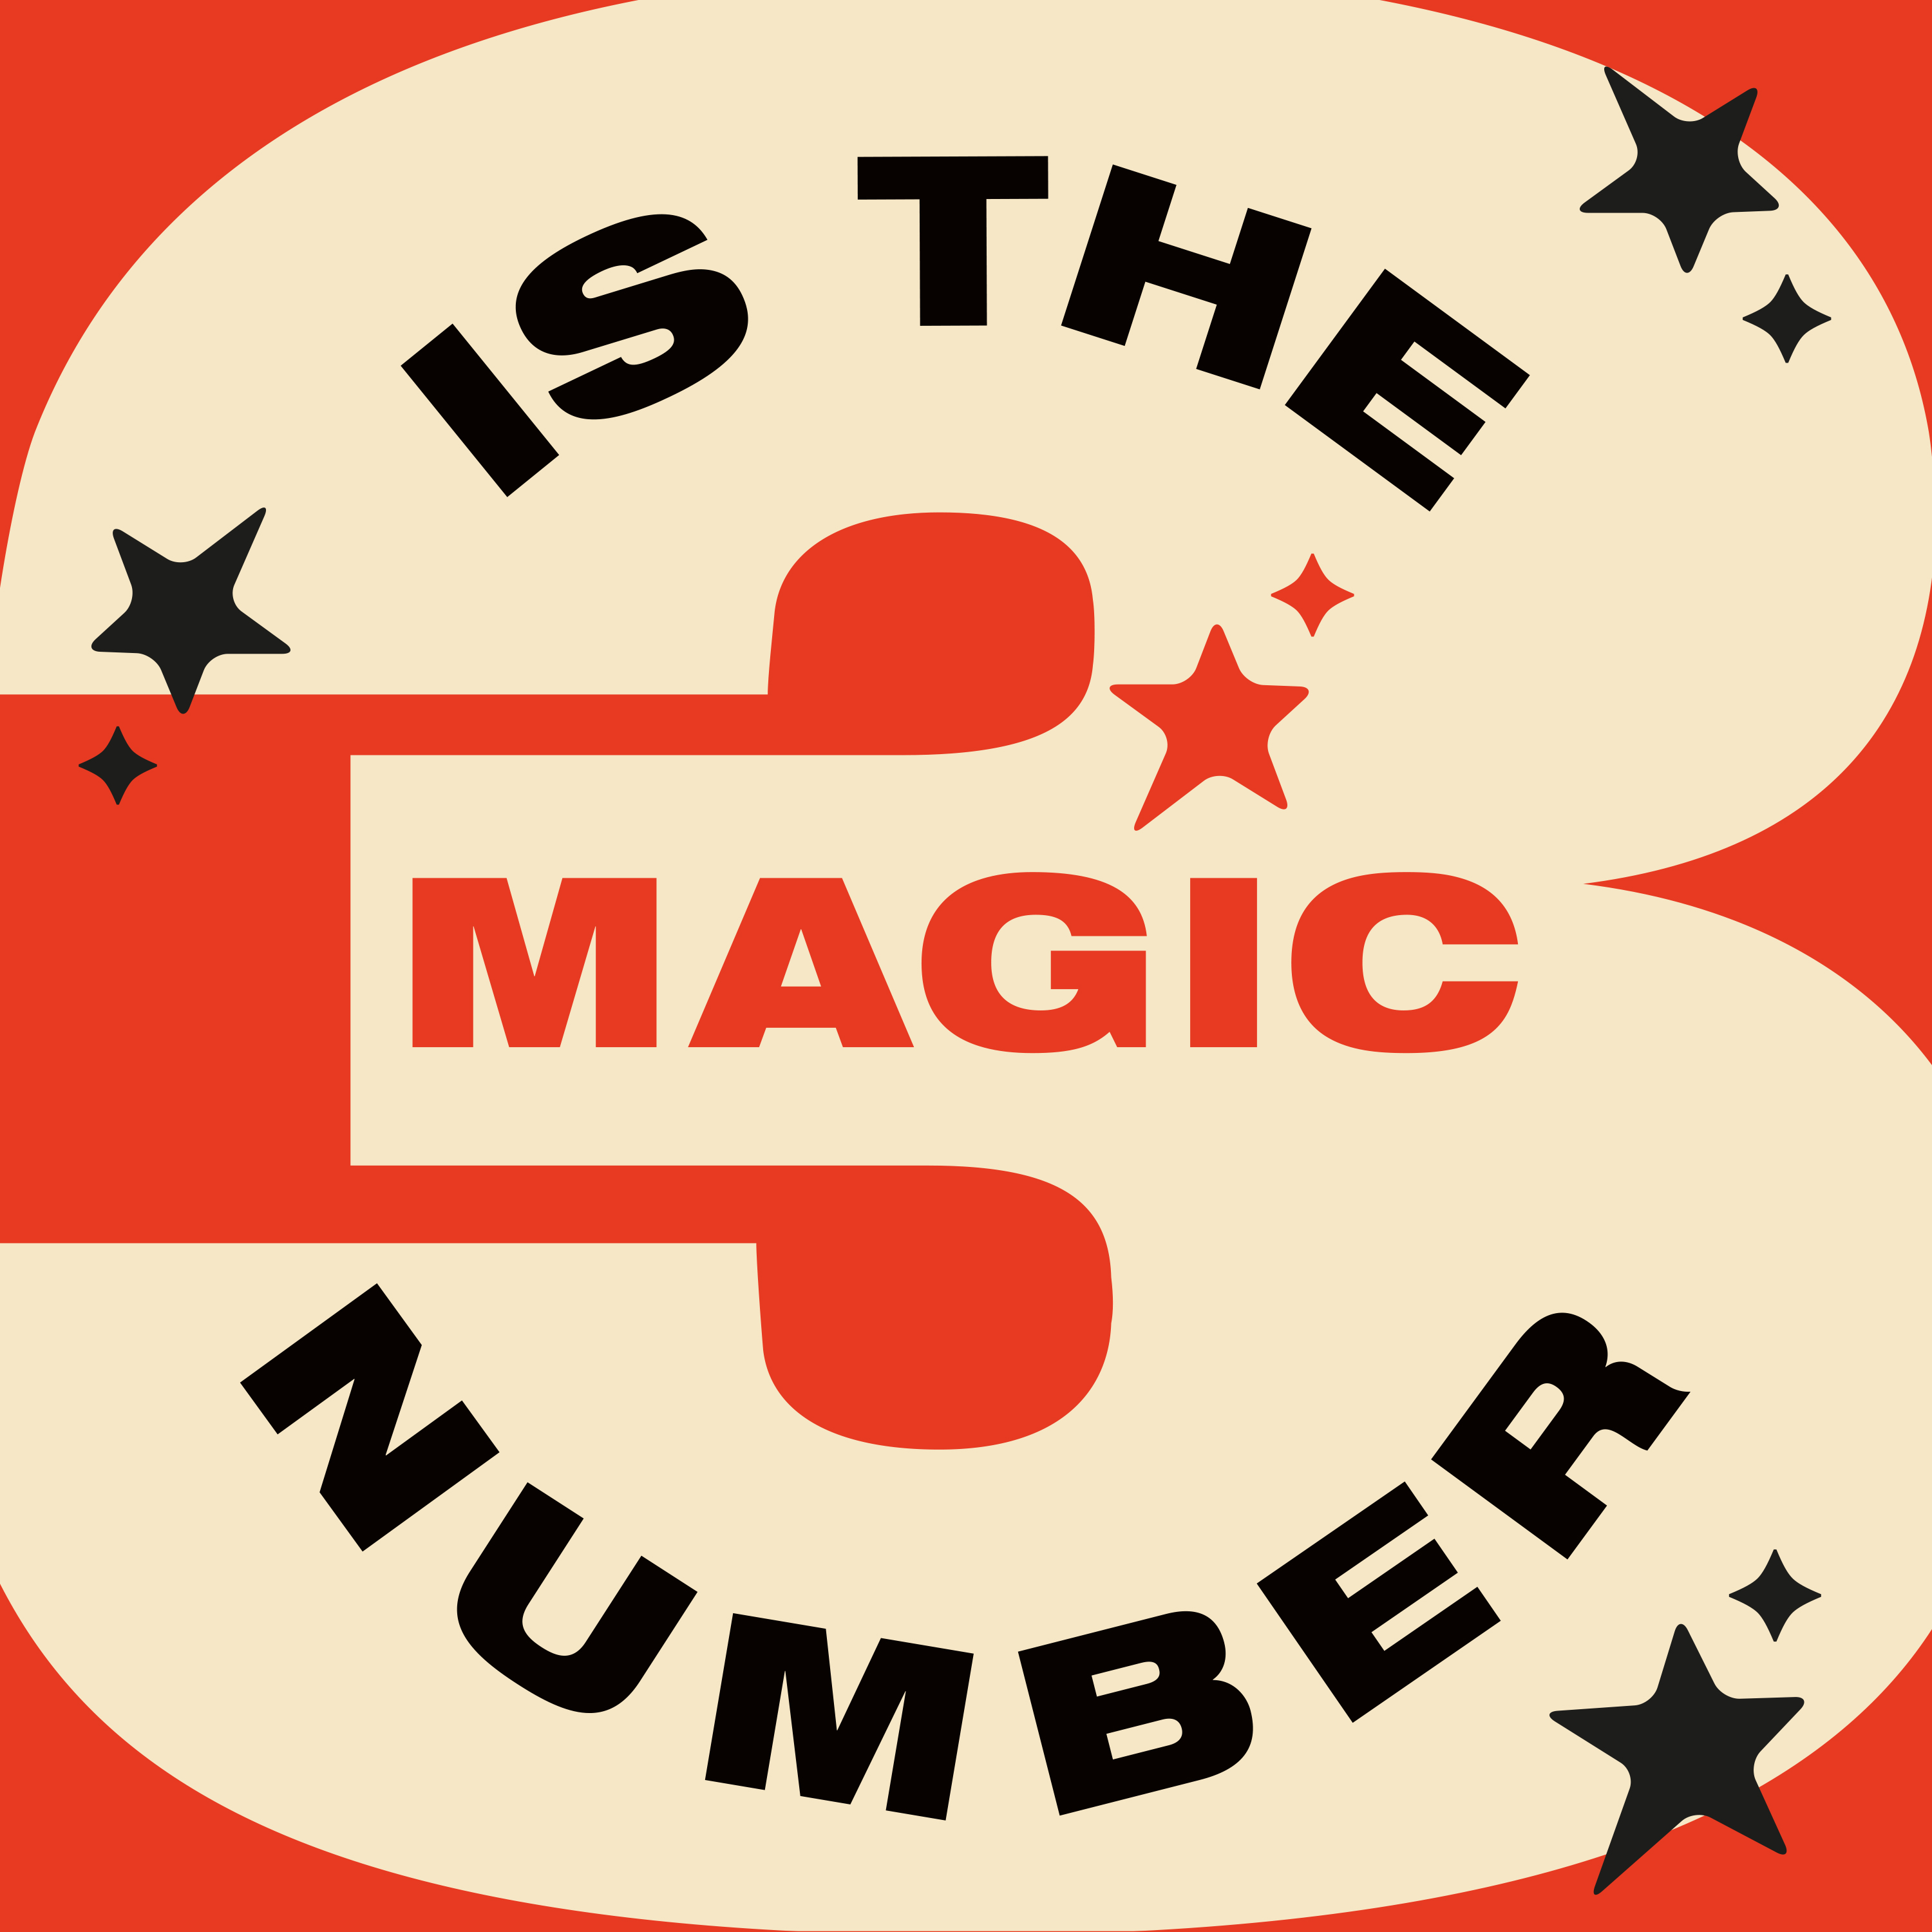 Artwork for 3 is the Magic Number